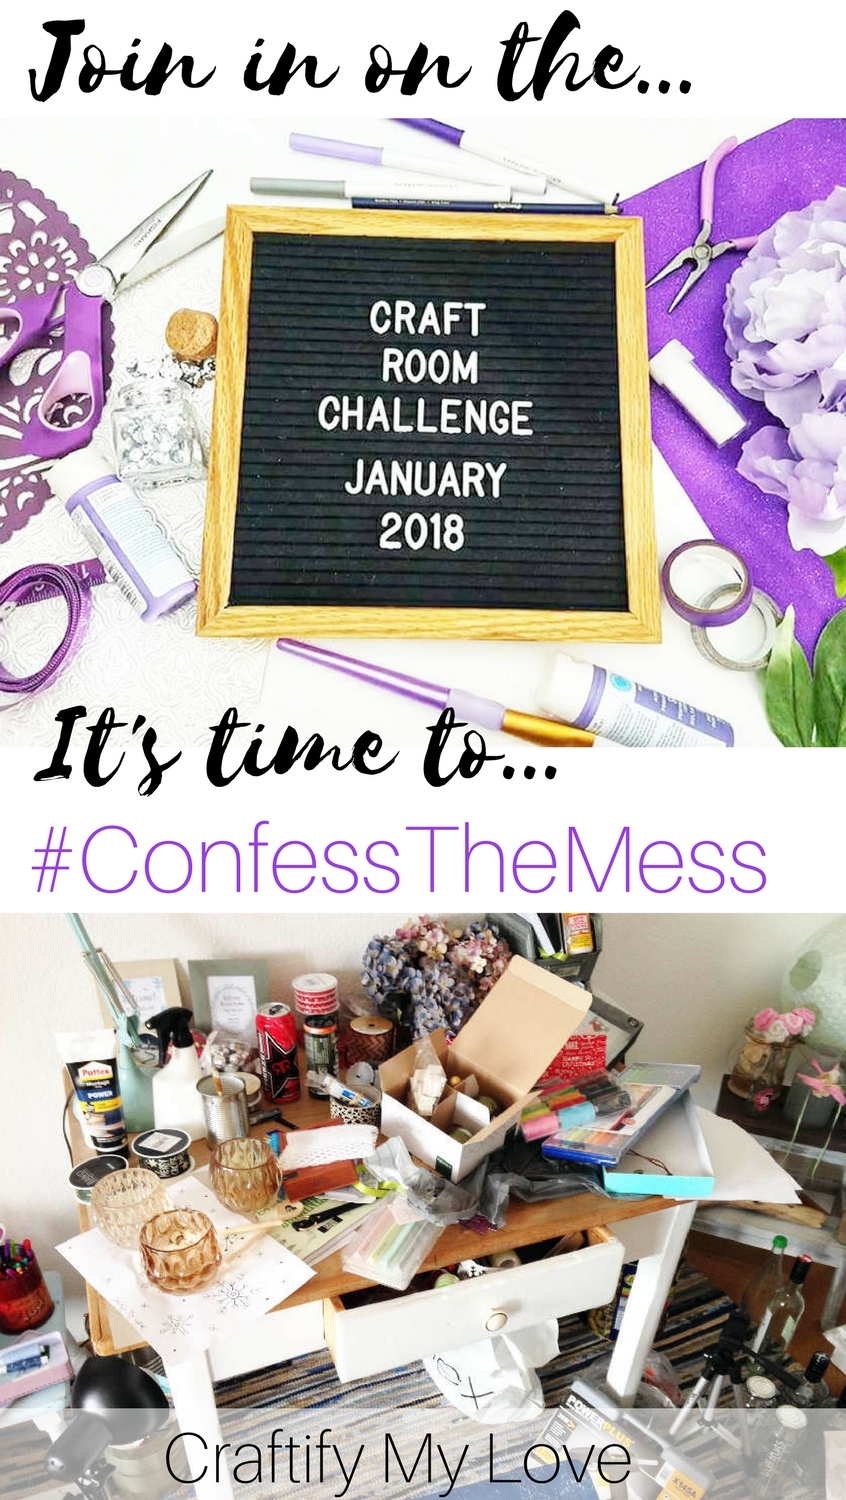 Join in on the Craft Room Challenge 2018 now! Task 1: #confessthemess | #craftroomchallenge #messycraftroom #organize #cleanupthatmess #craftroom #goals2018 #projectcleanup #cleanup